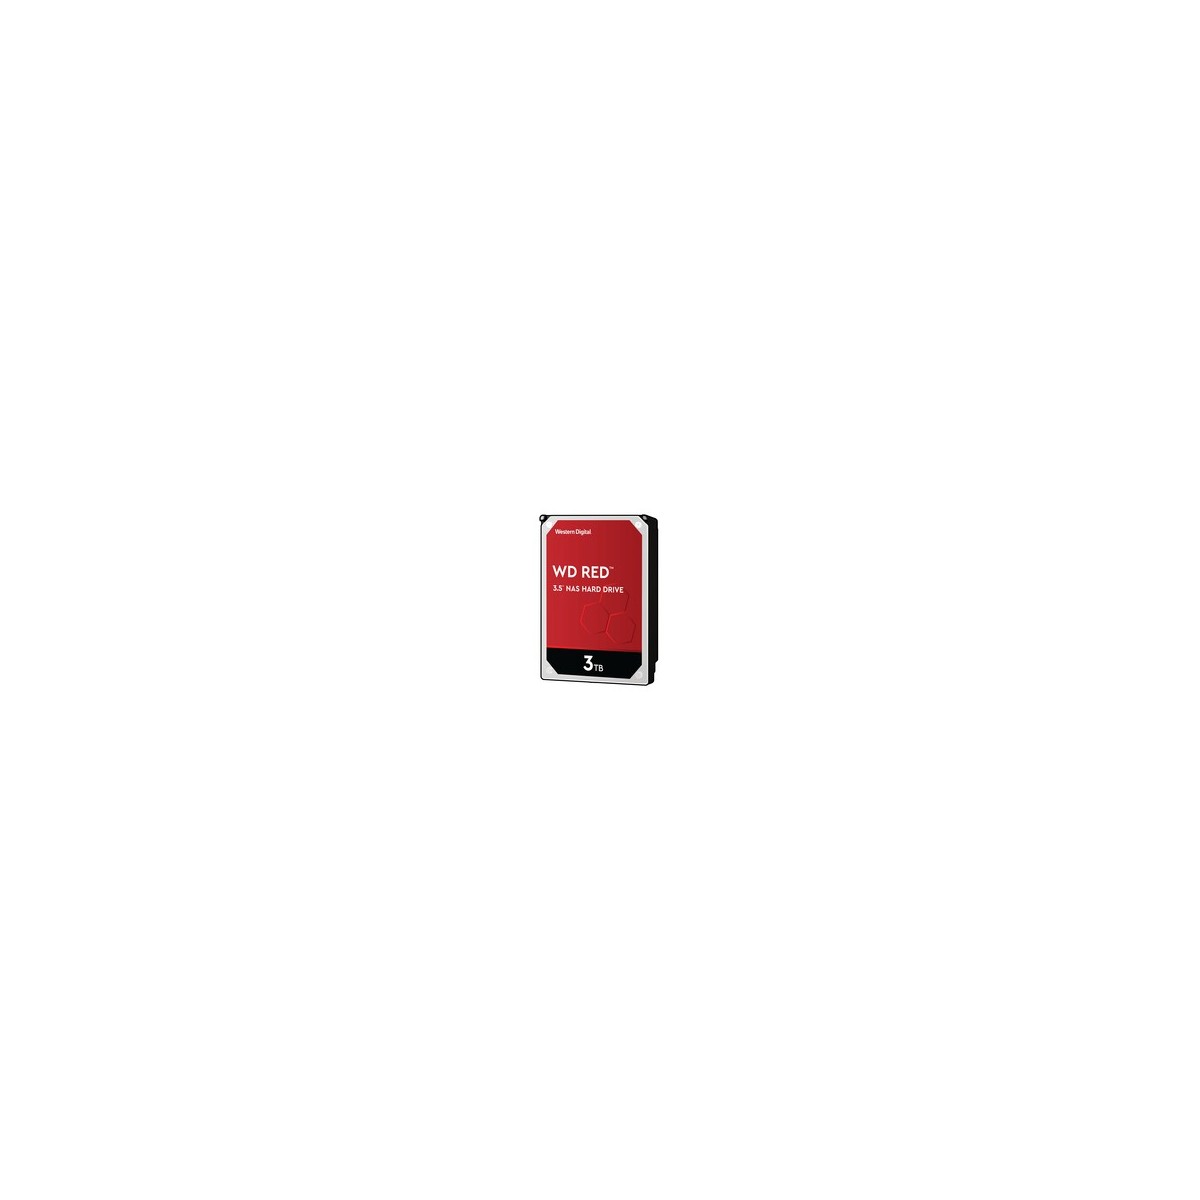 WD Red - 3.5 - 3000 GB - 5400 RPM